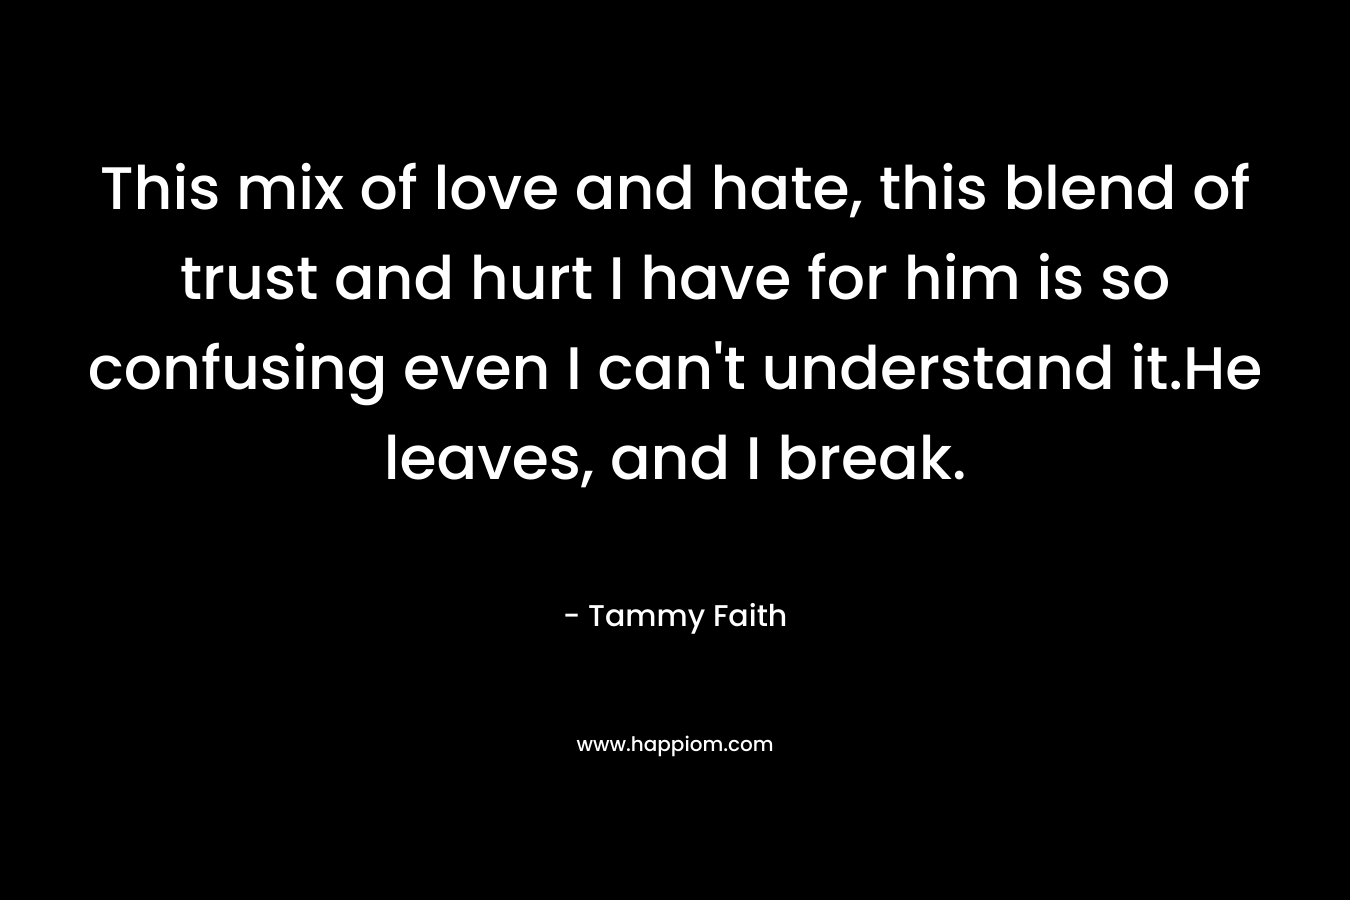 This mix of love and hate, this blend of trust and hurt I have for him is so confusing even I can't understand it.He leaves, and I break.